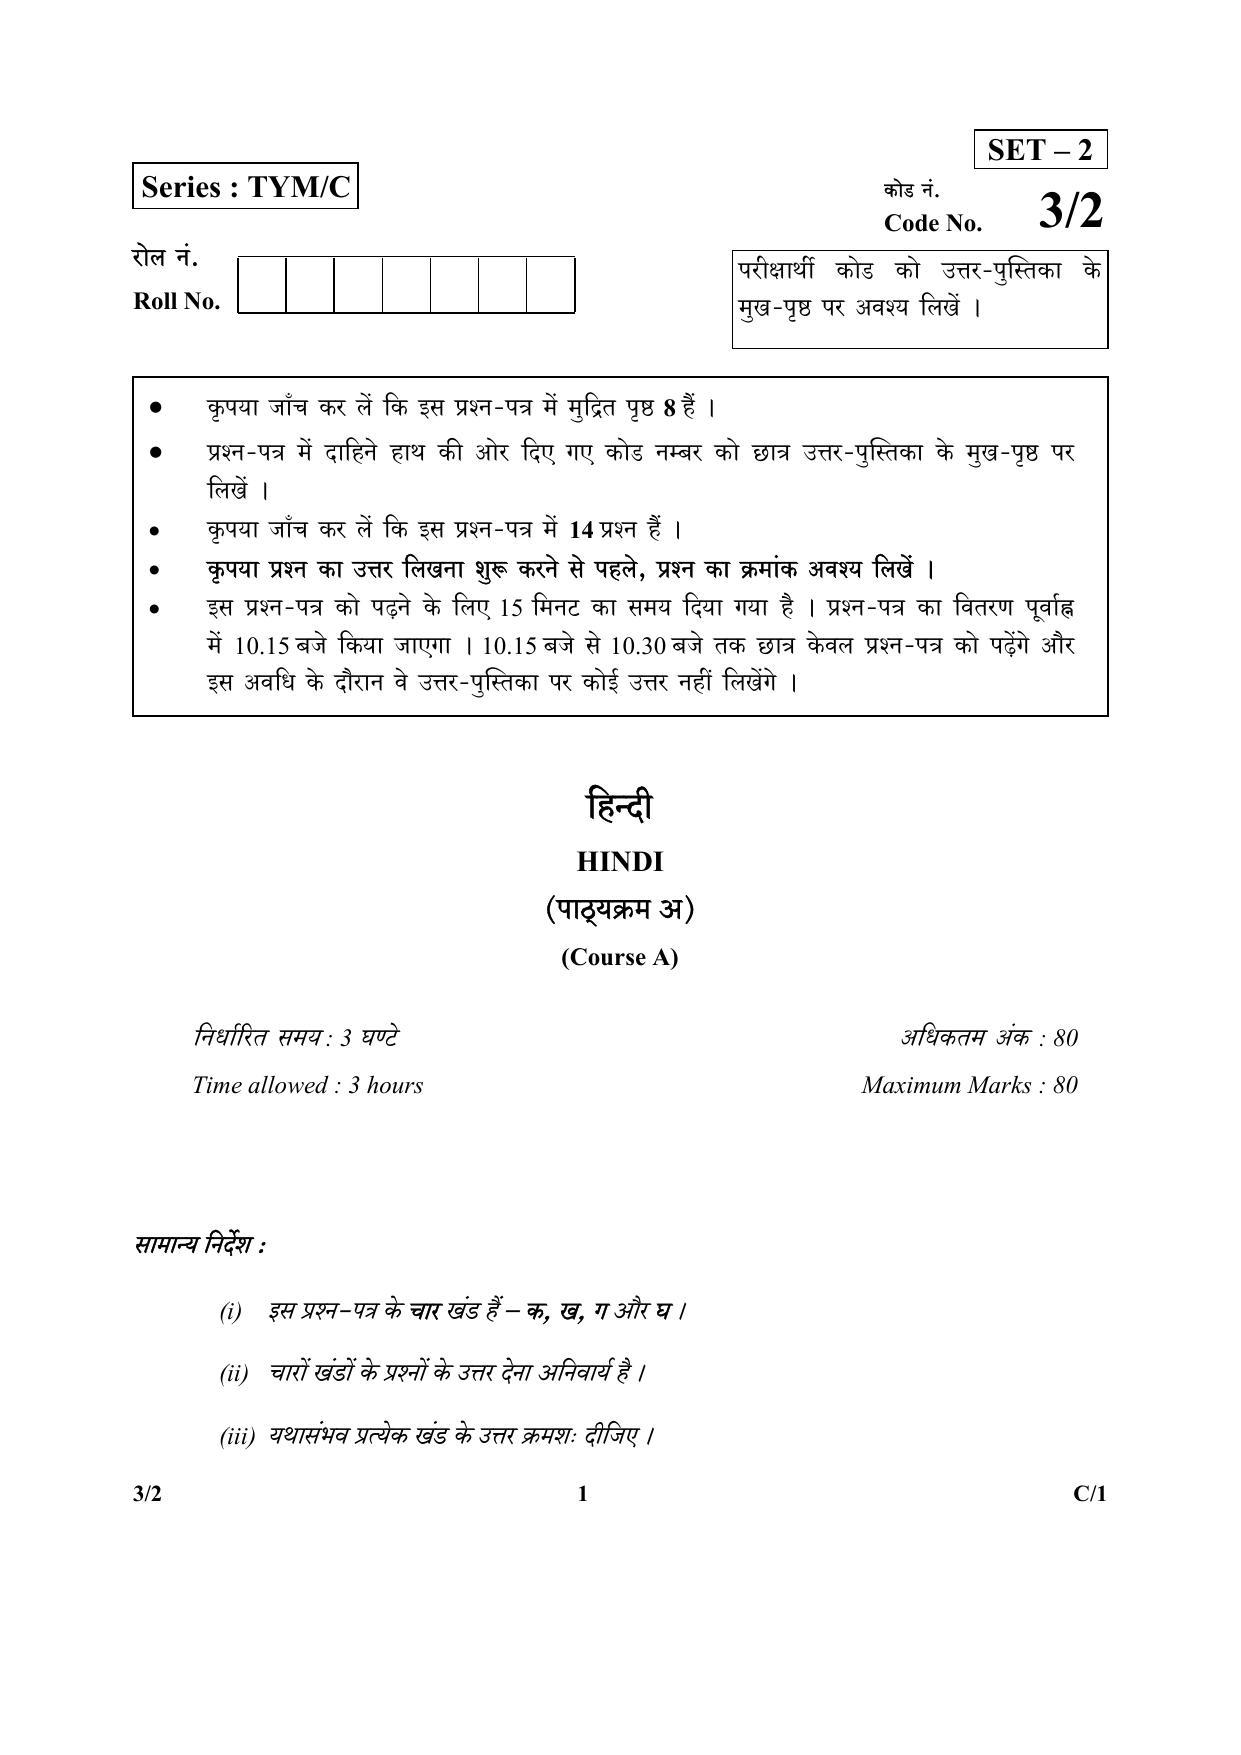 CBSE Class 10 3-2_Hindi 2018 Compartment Question Paper - Page 1